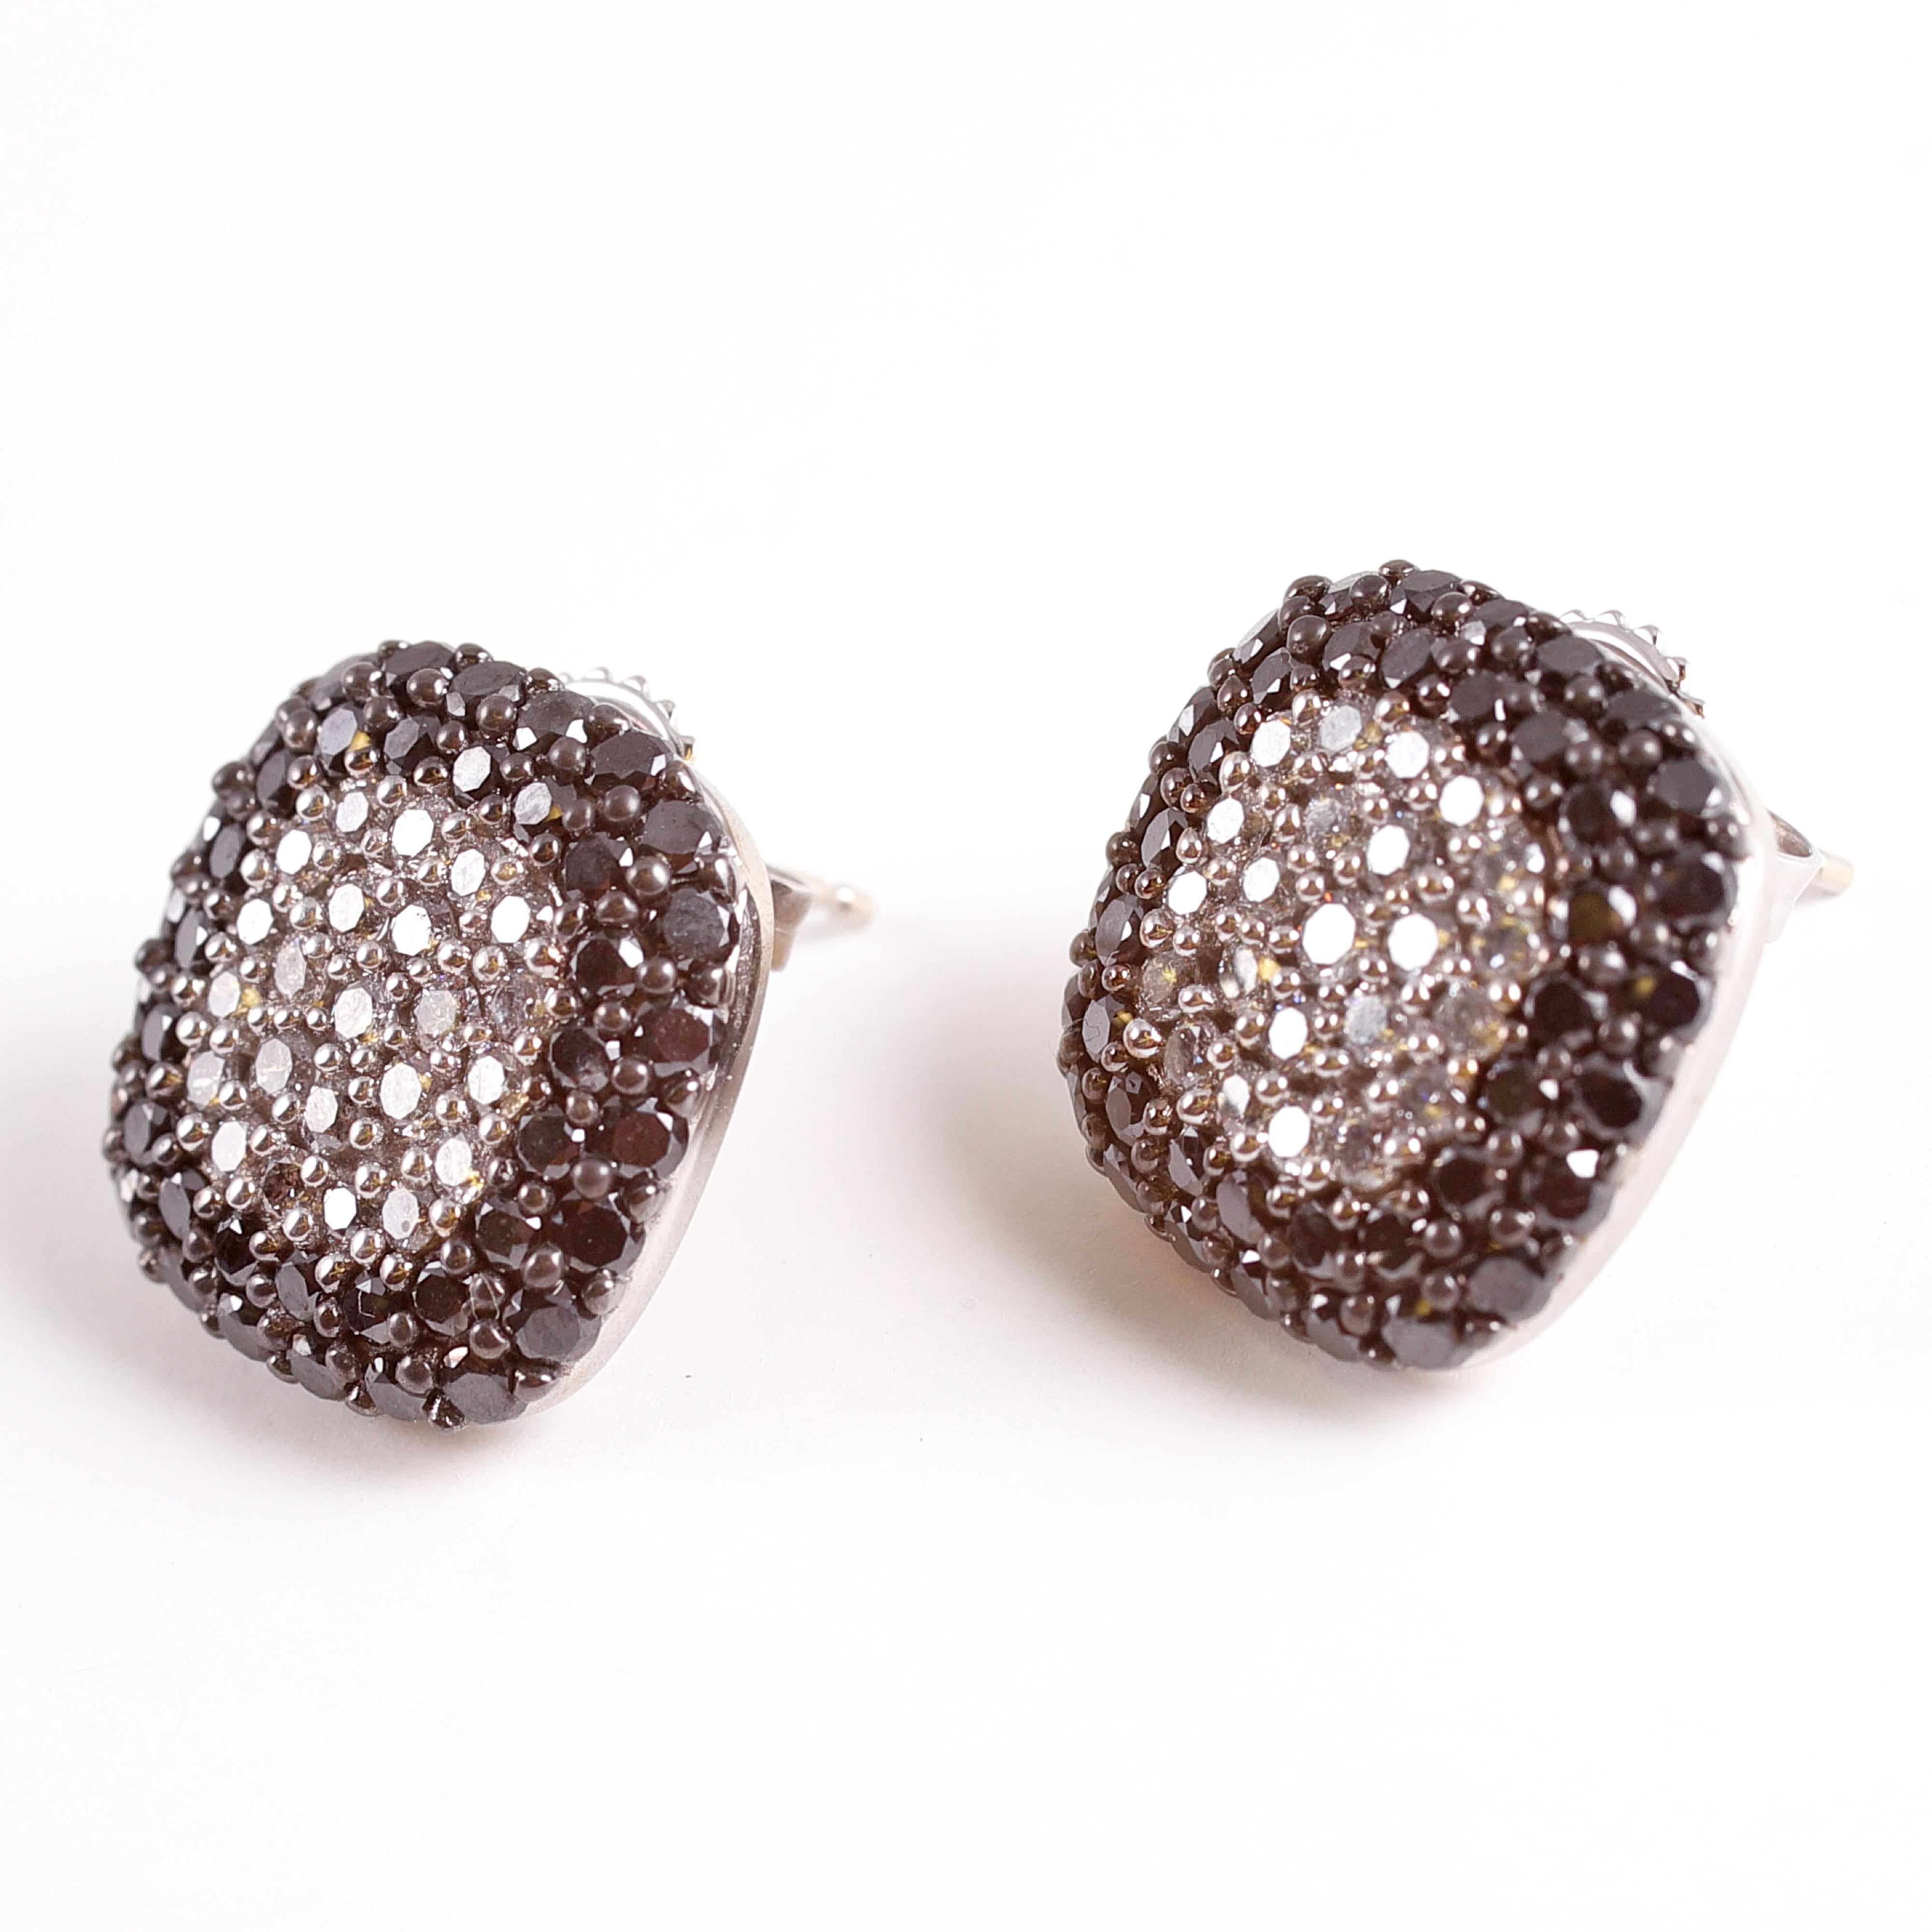 Pave set black and white diamonds set in 14 karat white gold by Effy.  Great earrings for any occasion!